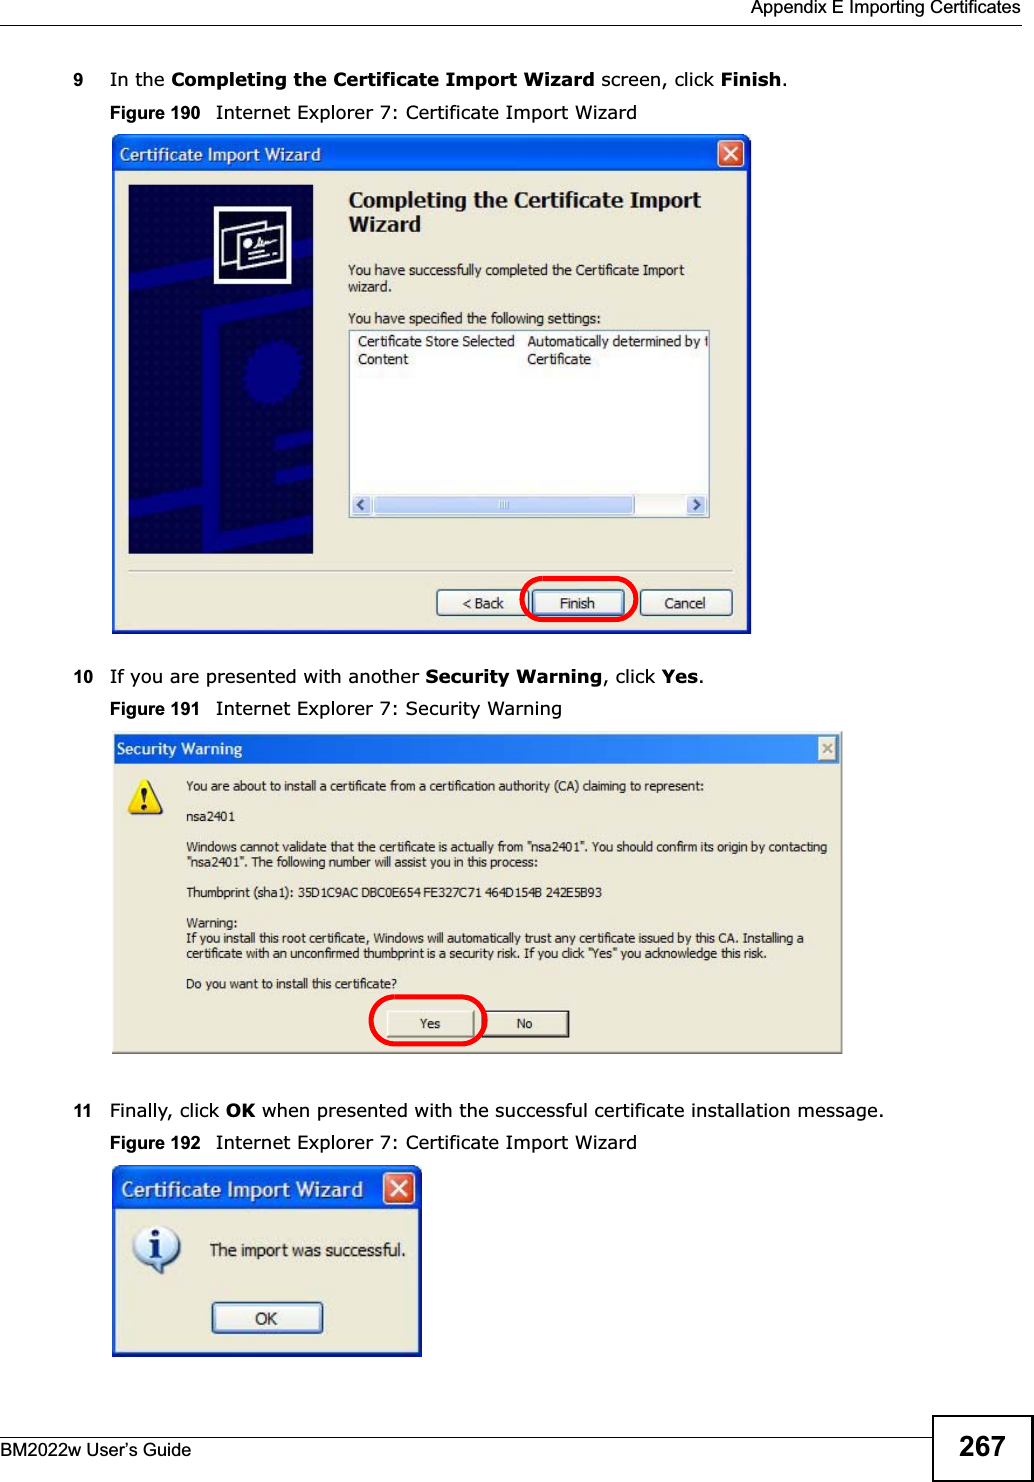  Appendix E Importing CertificatesBM2022w User’s Guide 2679In the Completing the Certificate Import Wizard screen, click Finish.Figure 190   Internet Explorer 7: Certificate Import Wizard10 If you are presented with another Security Warning, click Yes.Figure 191   Internet Explorer 7: Security Warning11 Finally, click OK when presented with the successful certificate installation message.Figure 192   Internet Explorer 7: Certificate Import Wizard